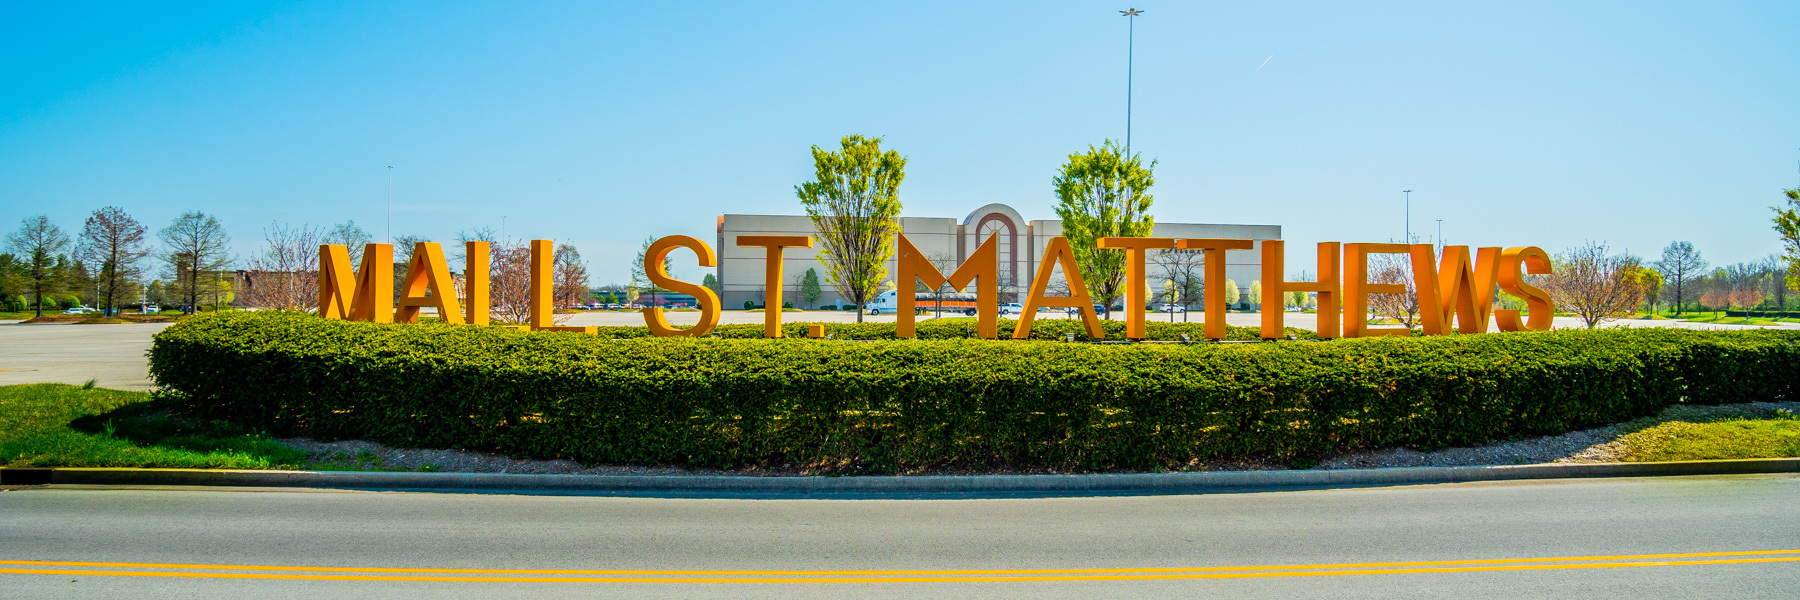 Entrance to St Matthews Mall in 40207